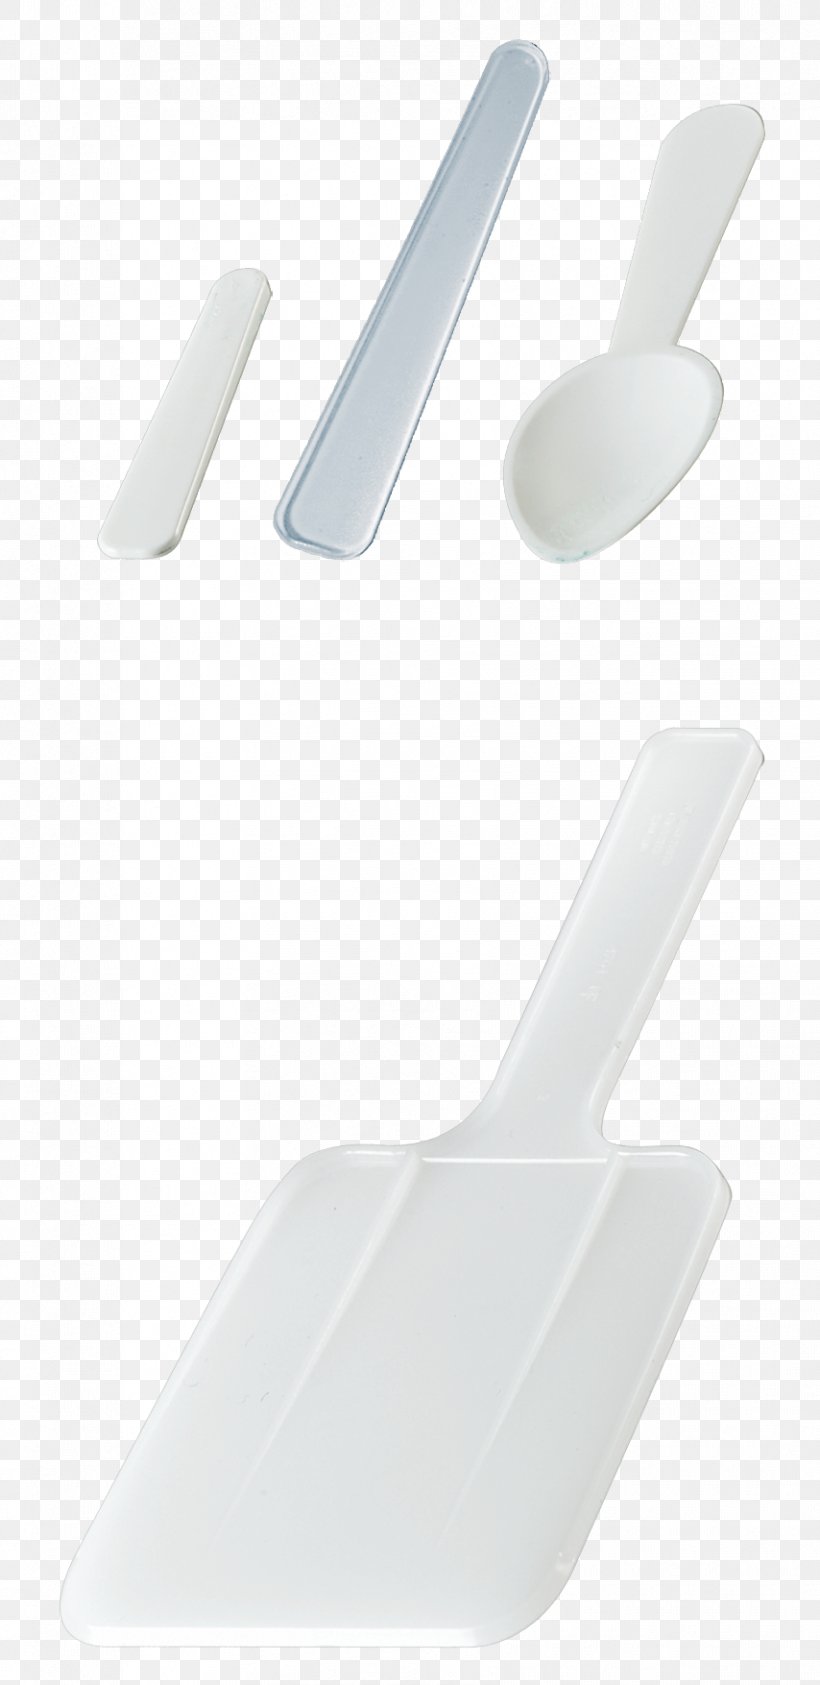 Download Plastic Spatula Png 854x1755px Plastic Hardware Spatula Download Free Yellowimages Mockups